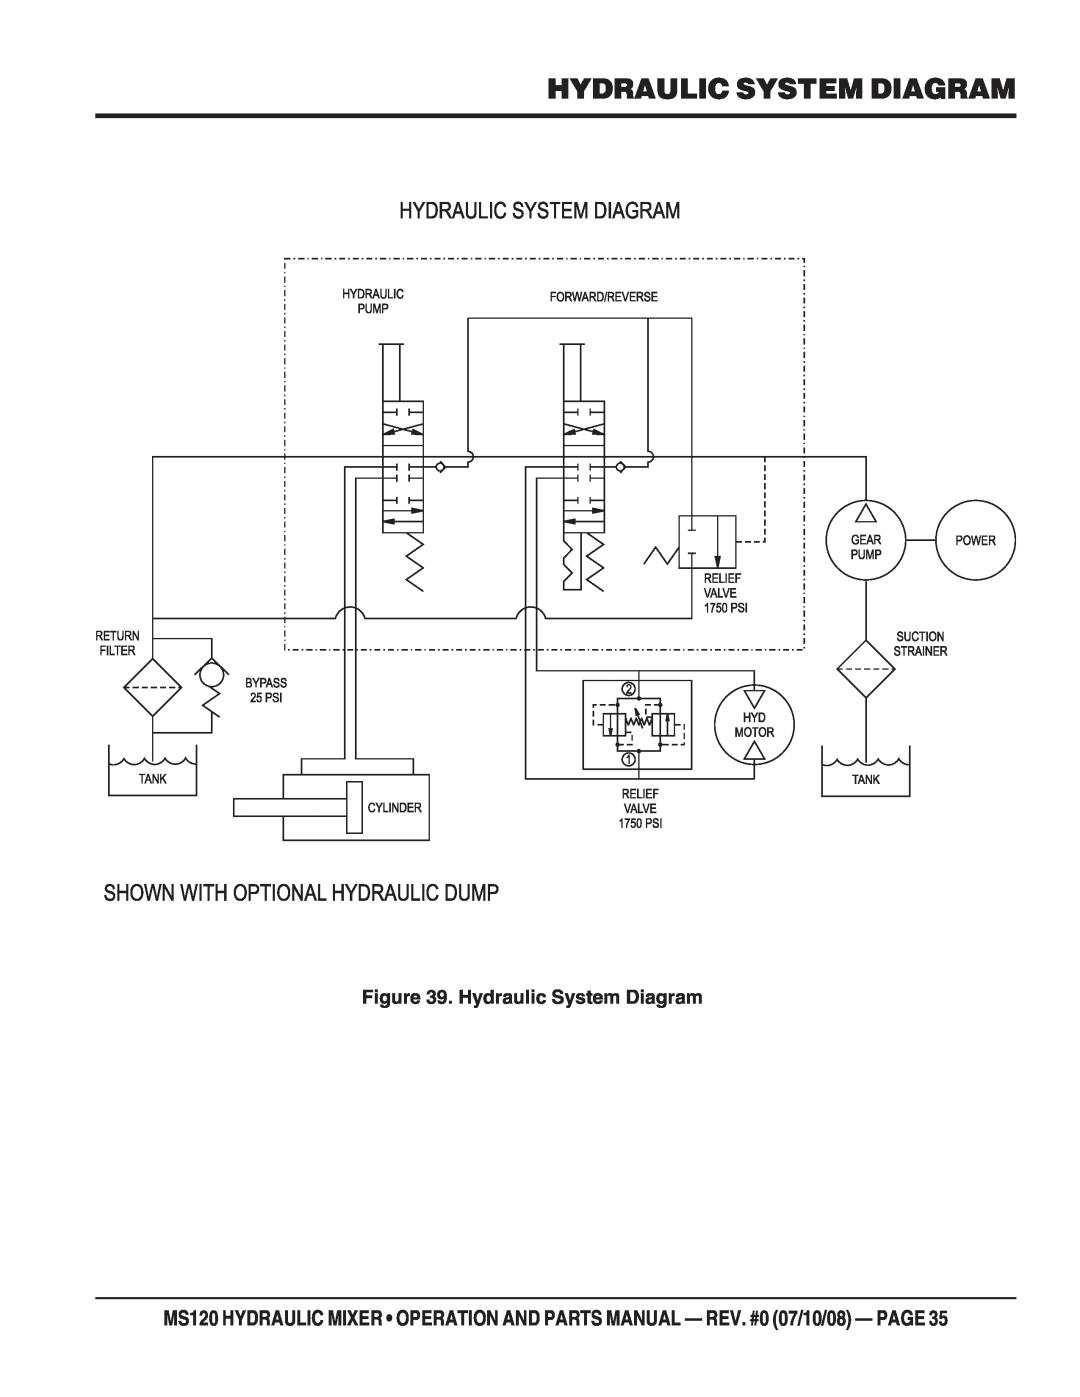 Stow MS120HD13, MS120H13 manual Hydraulic System Diagram 